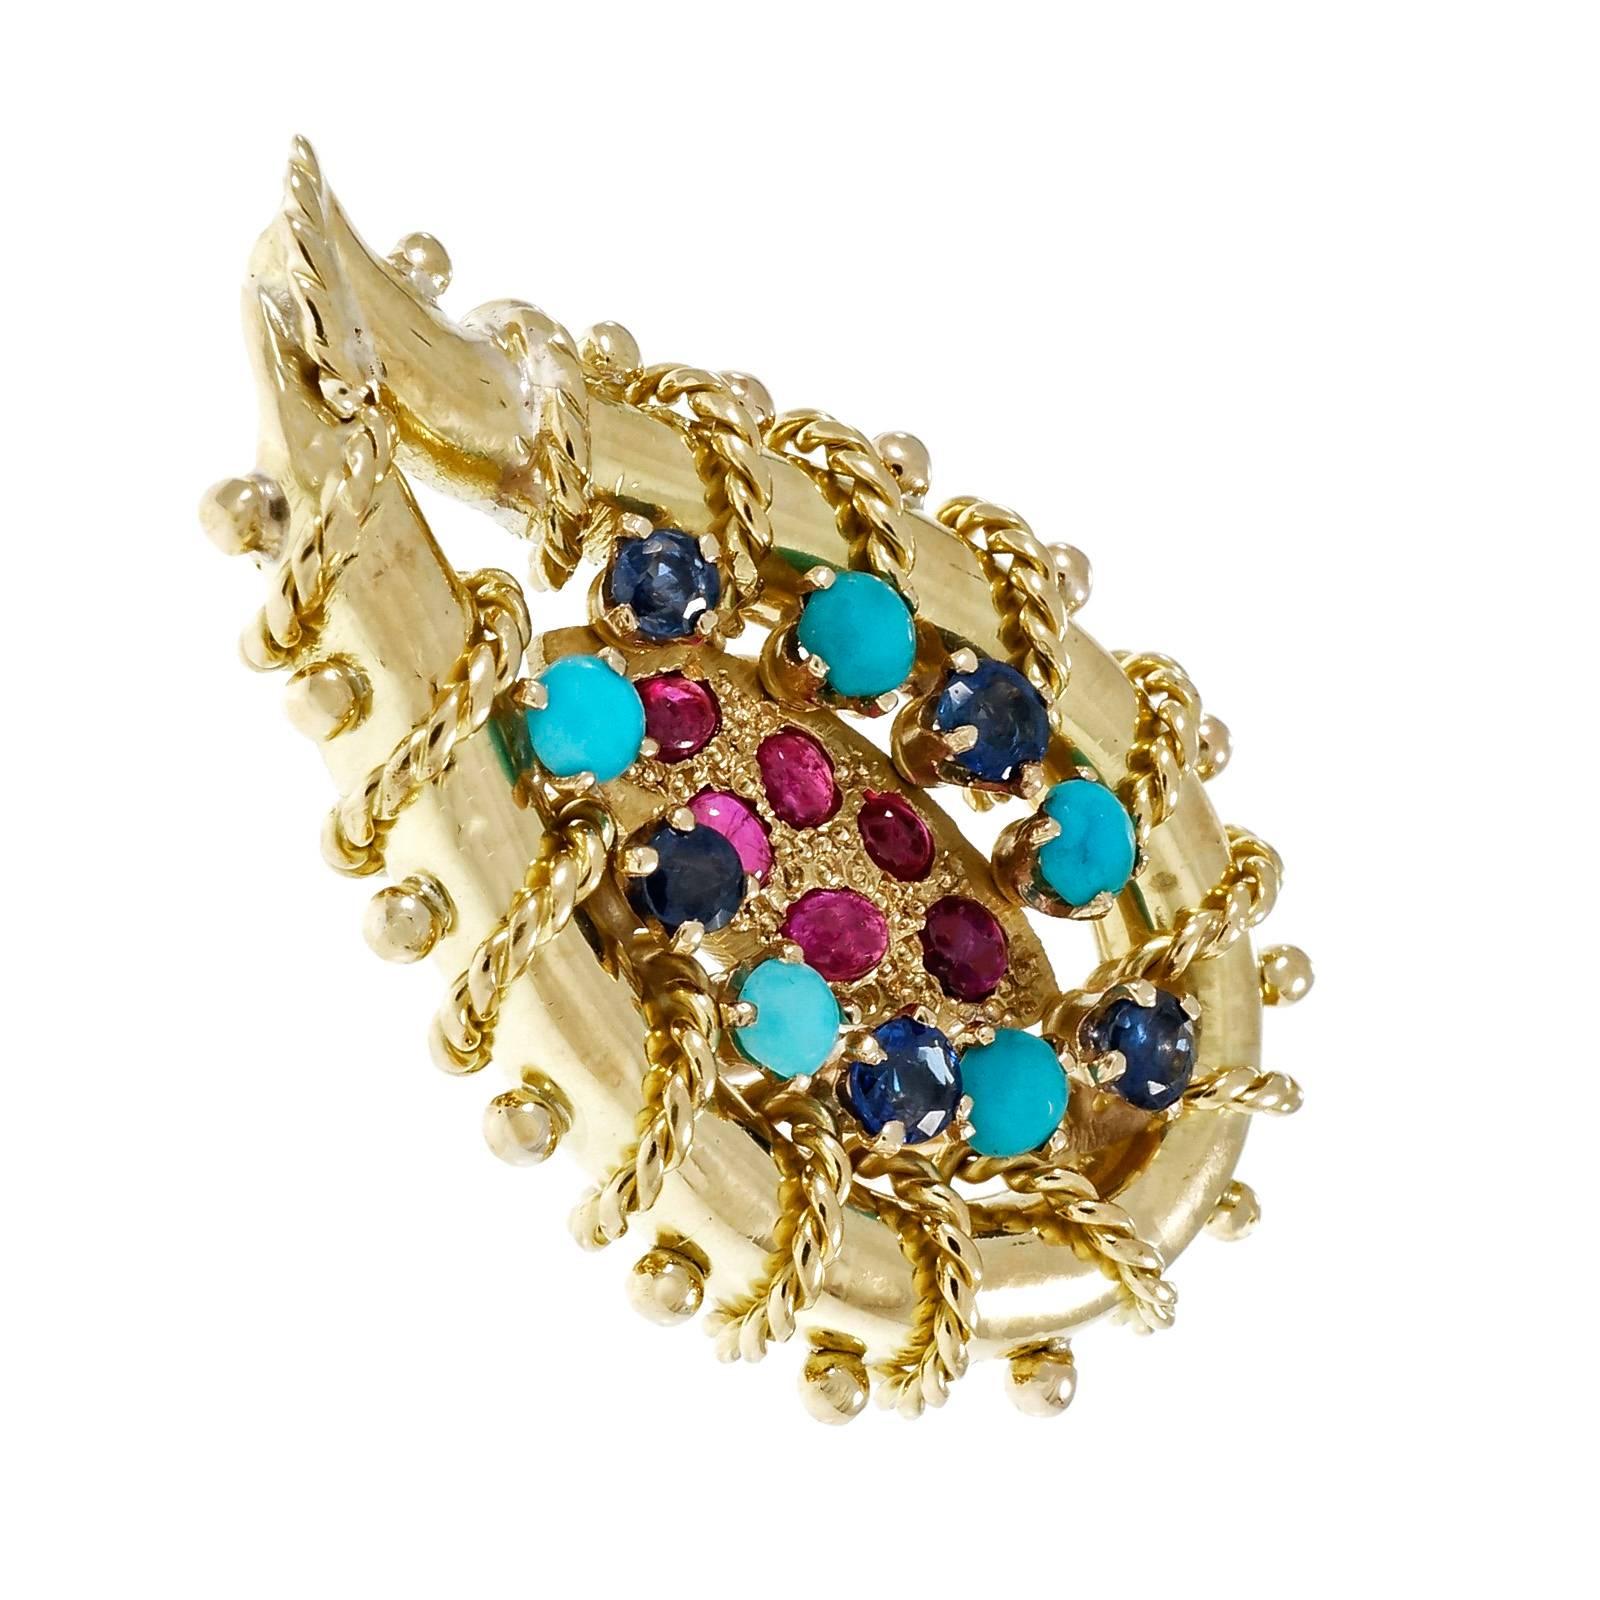 1950’s 18k yellow gold Ruby Turquoise Sapphire clip post earrings. Rope detail. Earrings and post tested 18k and 14k and Omega clips

12 oval cabochon red Rubies, approx. total weight .39cts, 2.32 – 2.52 x 1.69 – 1.88mm
10 round blue Sapphires,